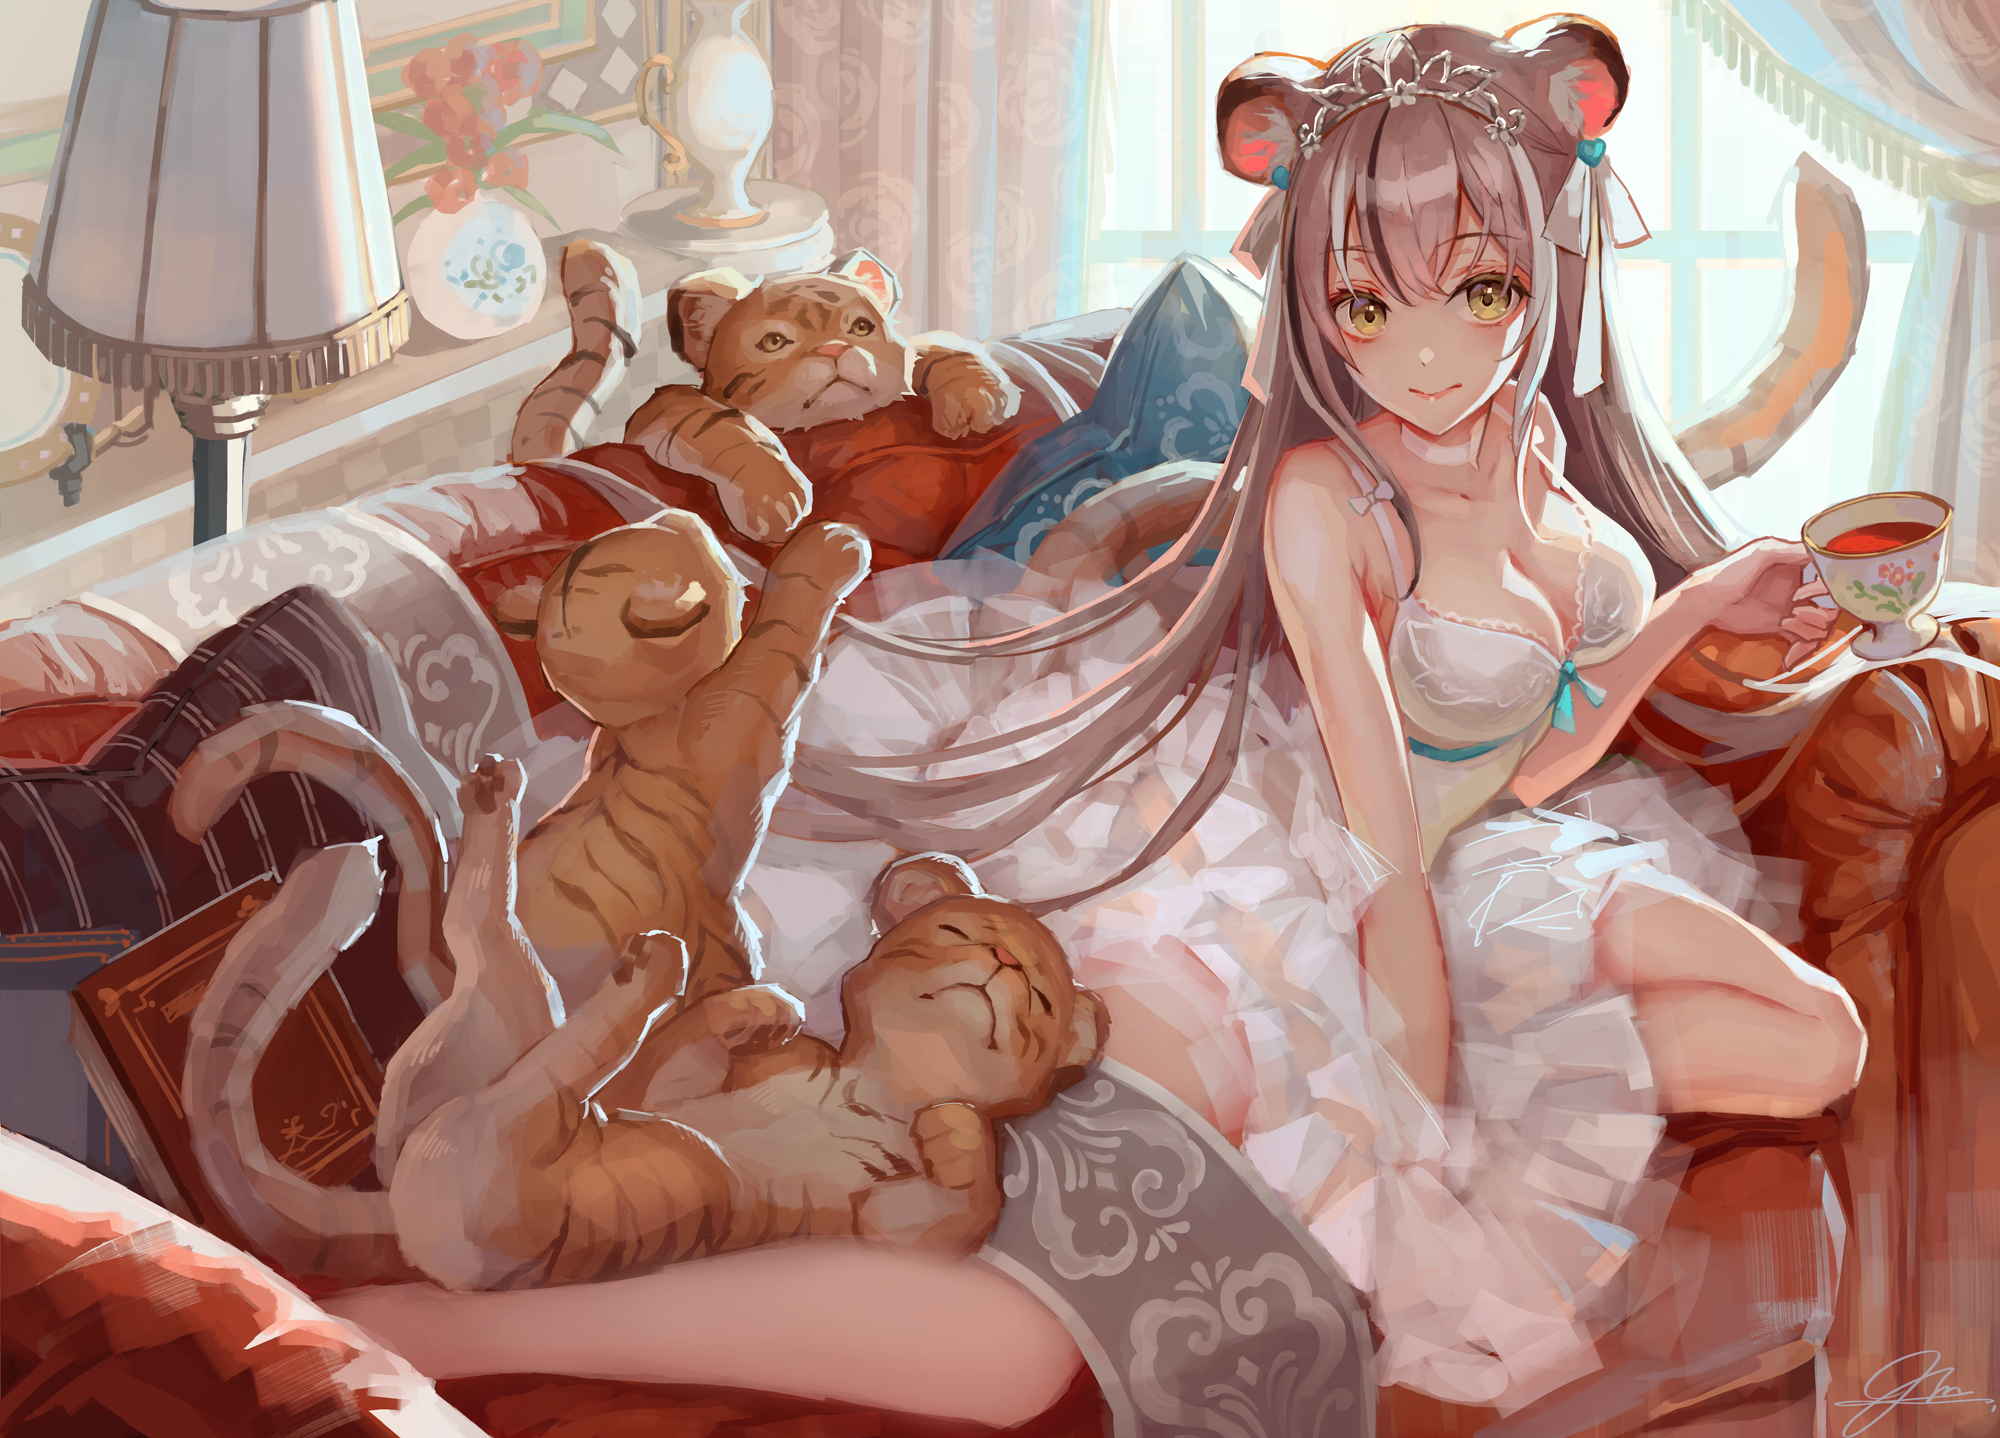 Anime 2000x1438 anime girls anime original characters animal ears fantasy girl tiger cub long hair bangs looking at viewer smiling cleavage dress white dress cup couch 2D artwork drawing digital art illustration Mai Okuma